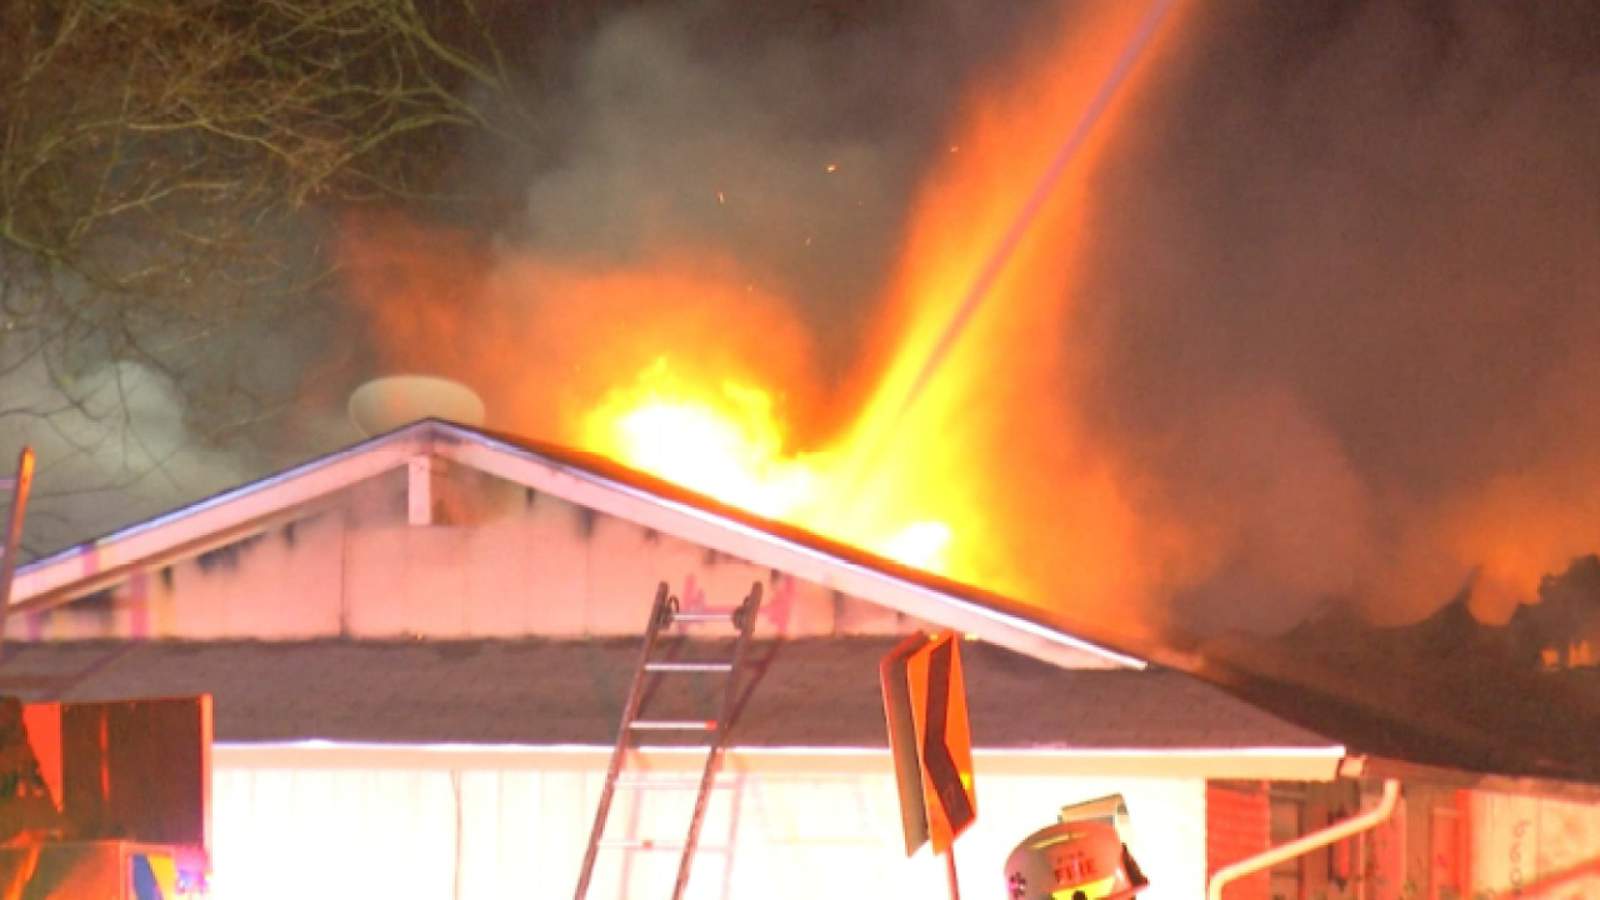 Duplex fire forces 8 people, cat, out into cold weather